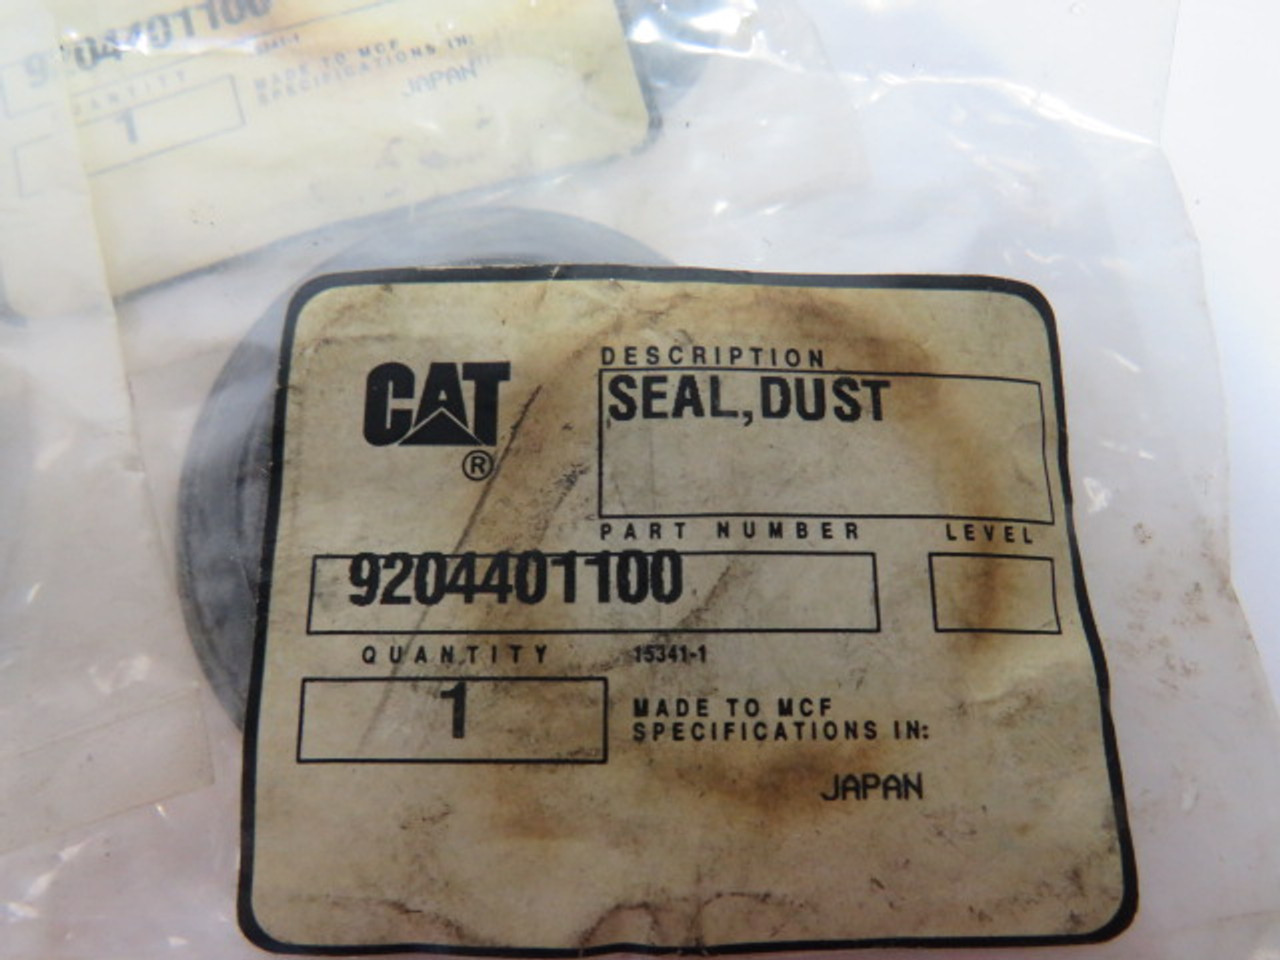 Caterpillar 9204401100 Dust Seal for Tow Motor Lot of 5 ! NWB !